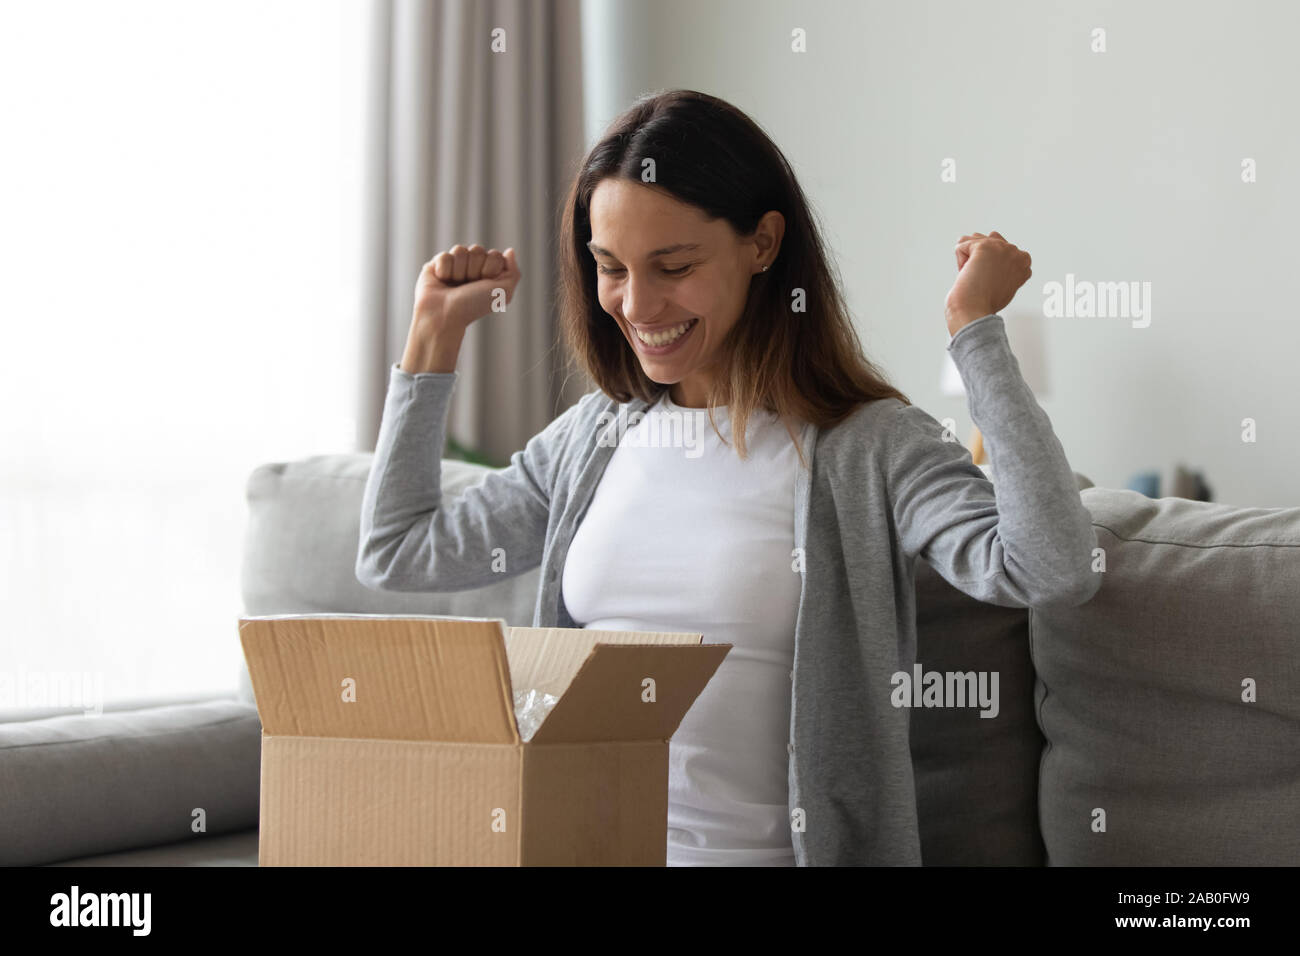 Cheery woman received long-awaited carton package feels happy Stock Photo